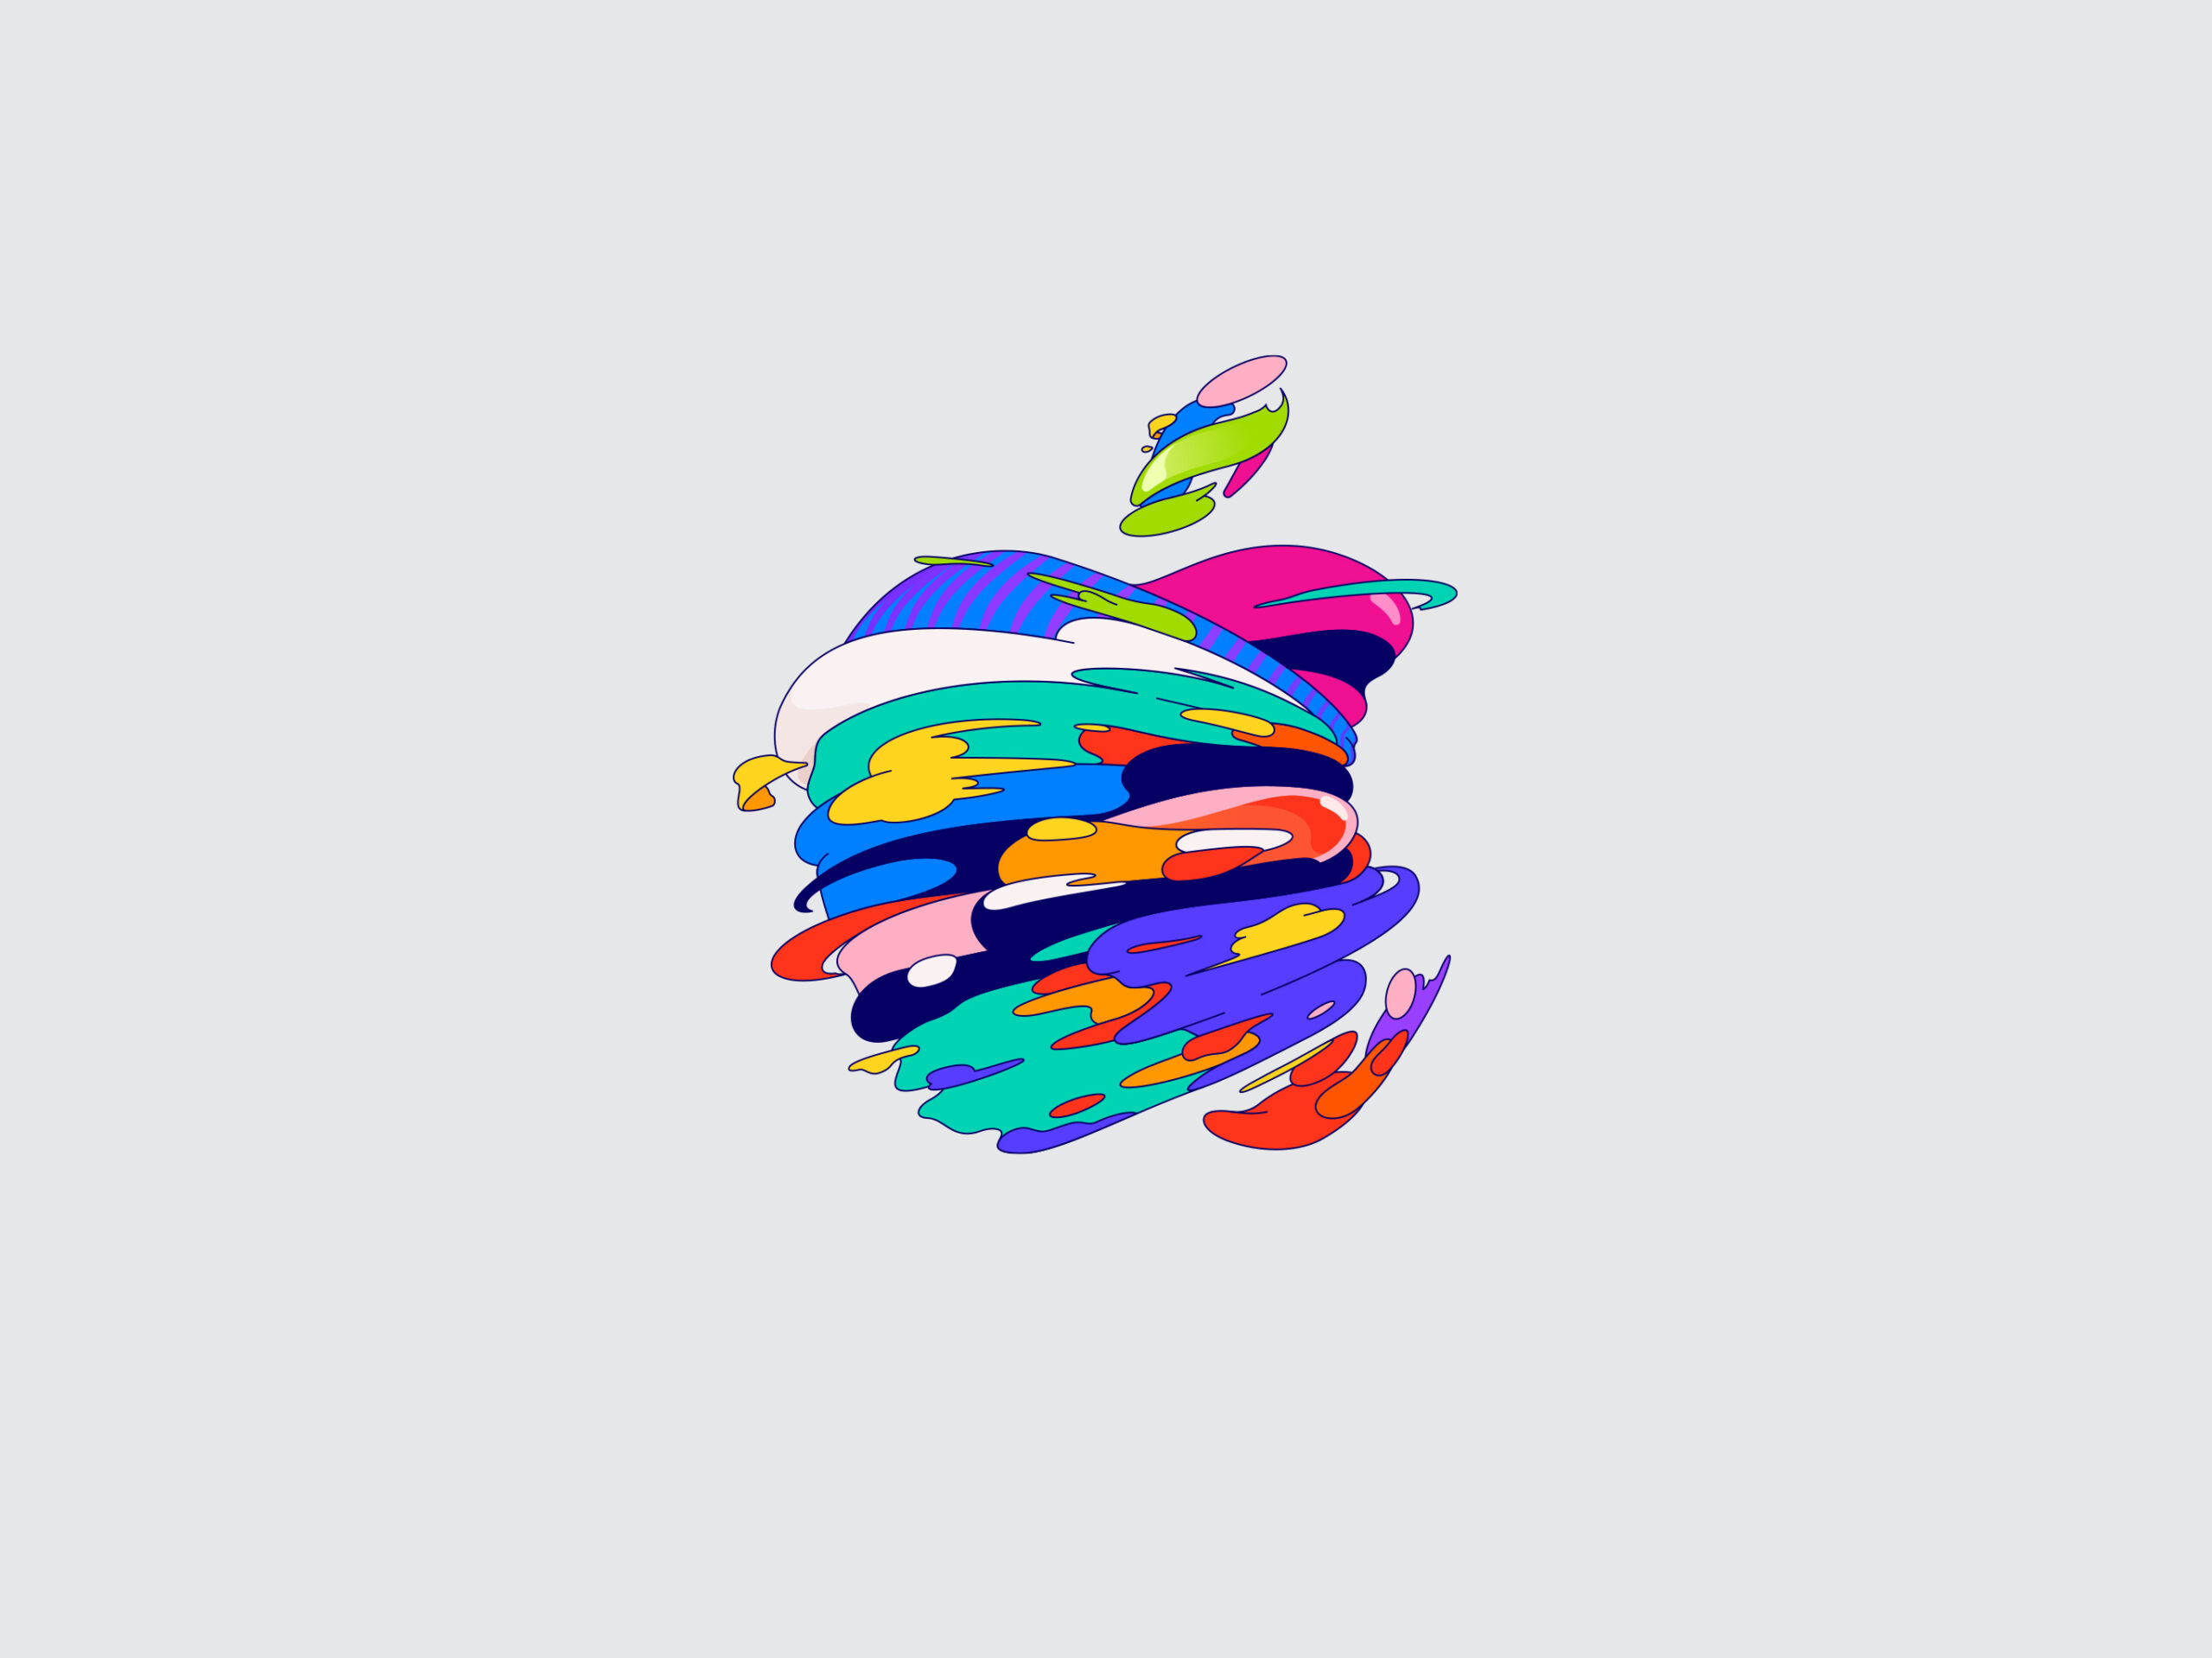 Apple Store Wuhan Wallpaper for iPhone, iPad and Mac